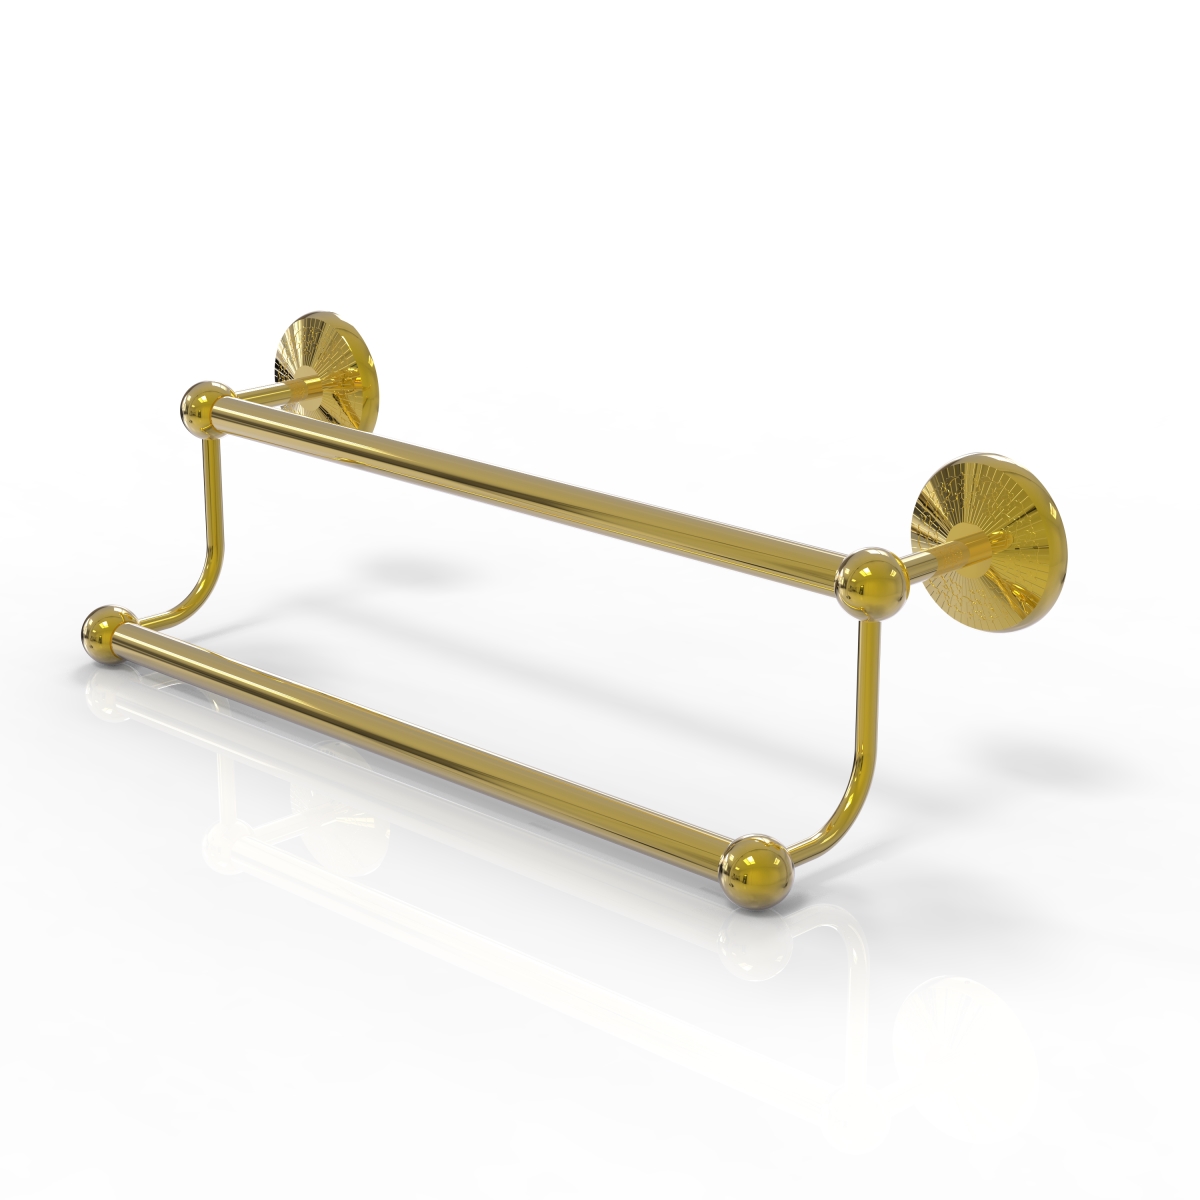 Allied Brass PMC-72-30-UNL Prestige Monte Carlo Collection 30 in. Double Towel Bar, Unlacquered Brass